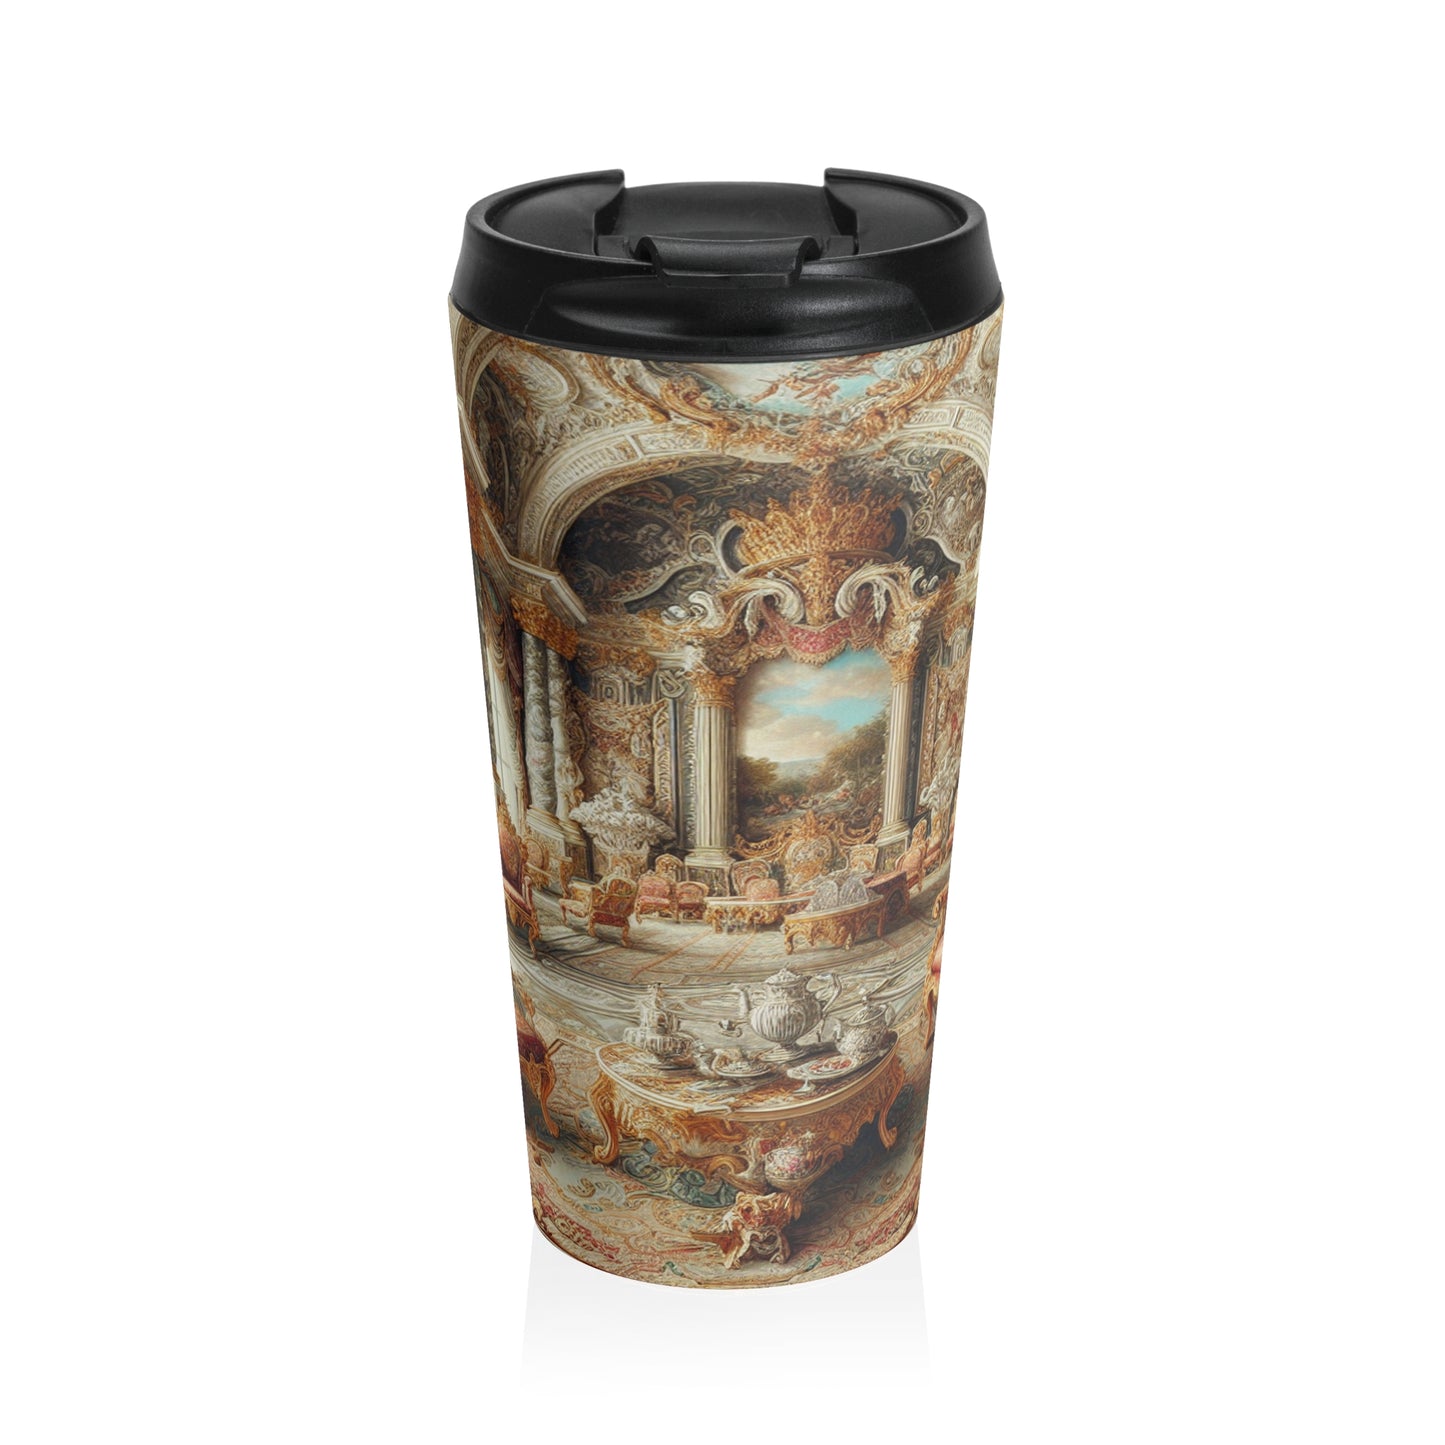 "Enchanted Court Symphony" - The Alien Stainless Steel Travel Mug Baroque Style